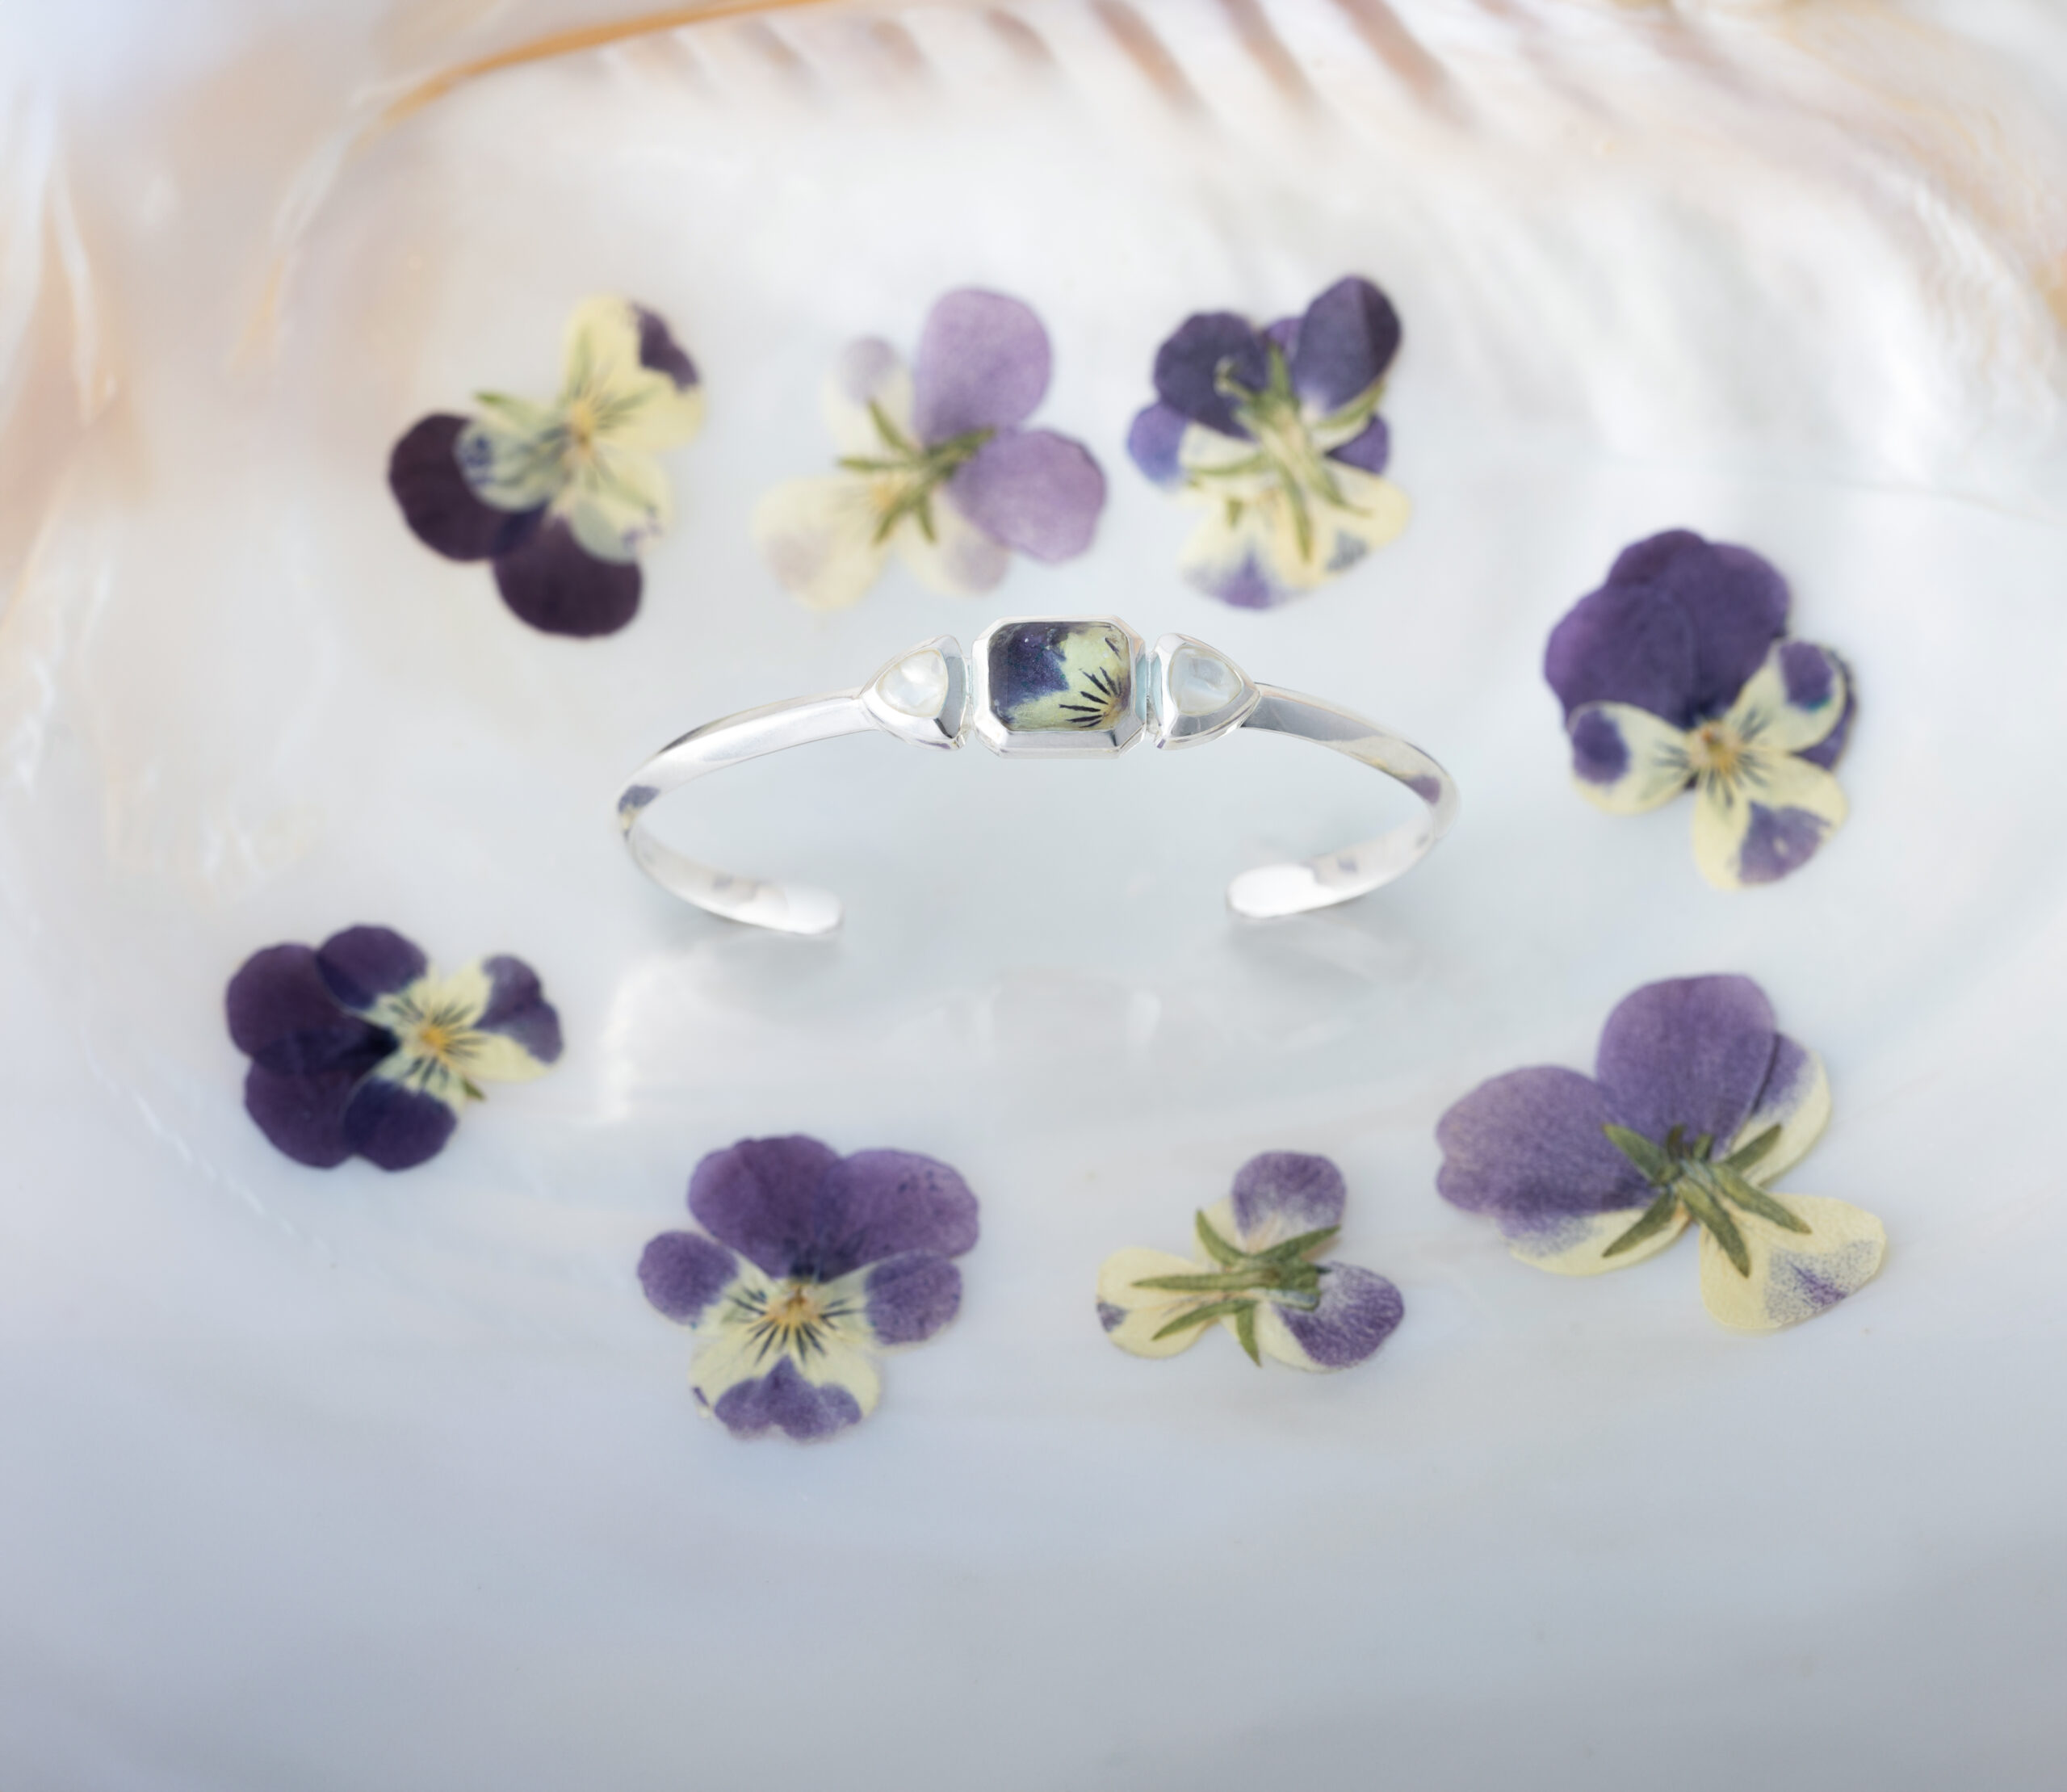 Product shot of spring flower jewelry, specifically the Serenity Cuff Bracelet with mother of pearl shell and violet flower petals